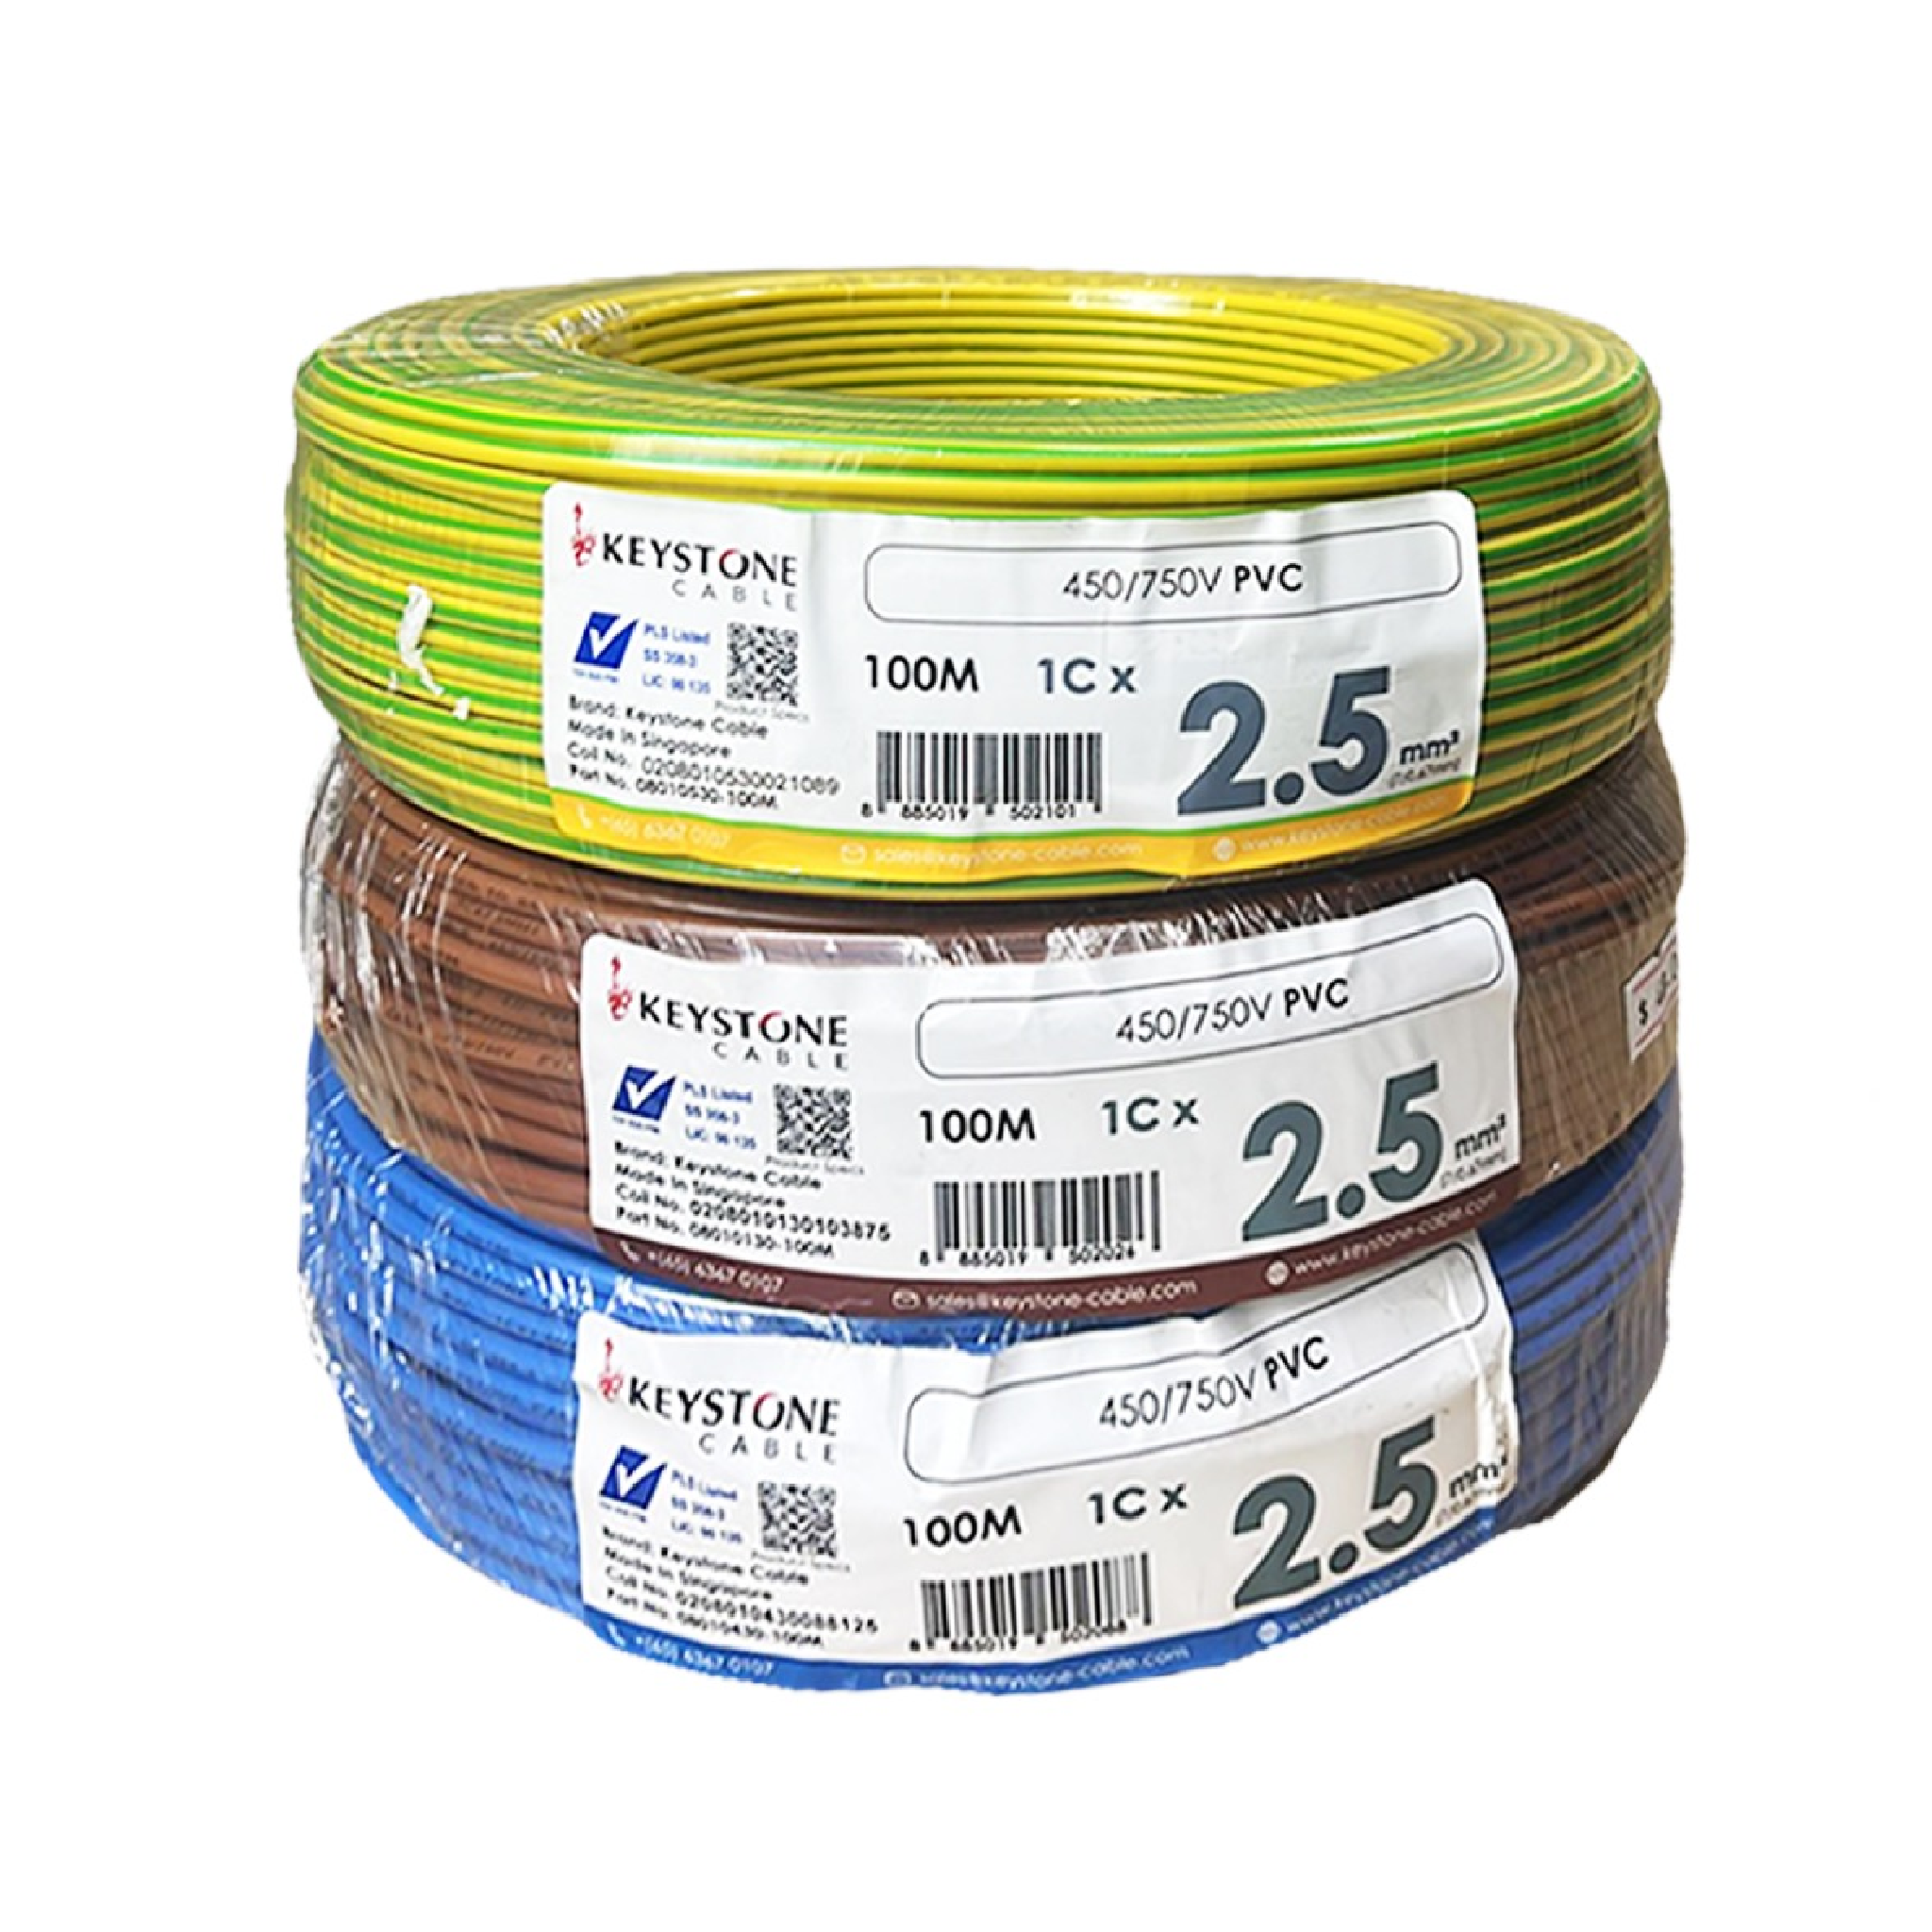 KEYSTONE PVC Insulated Non-Sheathed Cable 2.5mm2 (7/0.67mm) X 100Metres